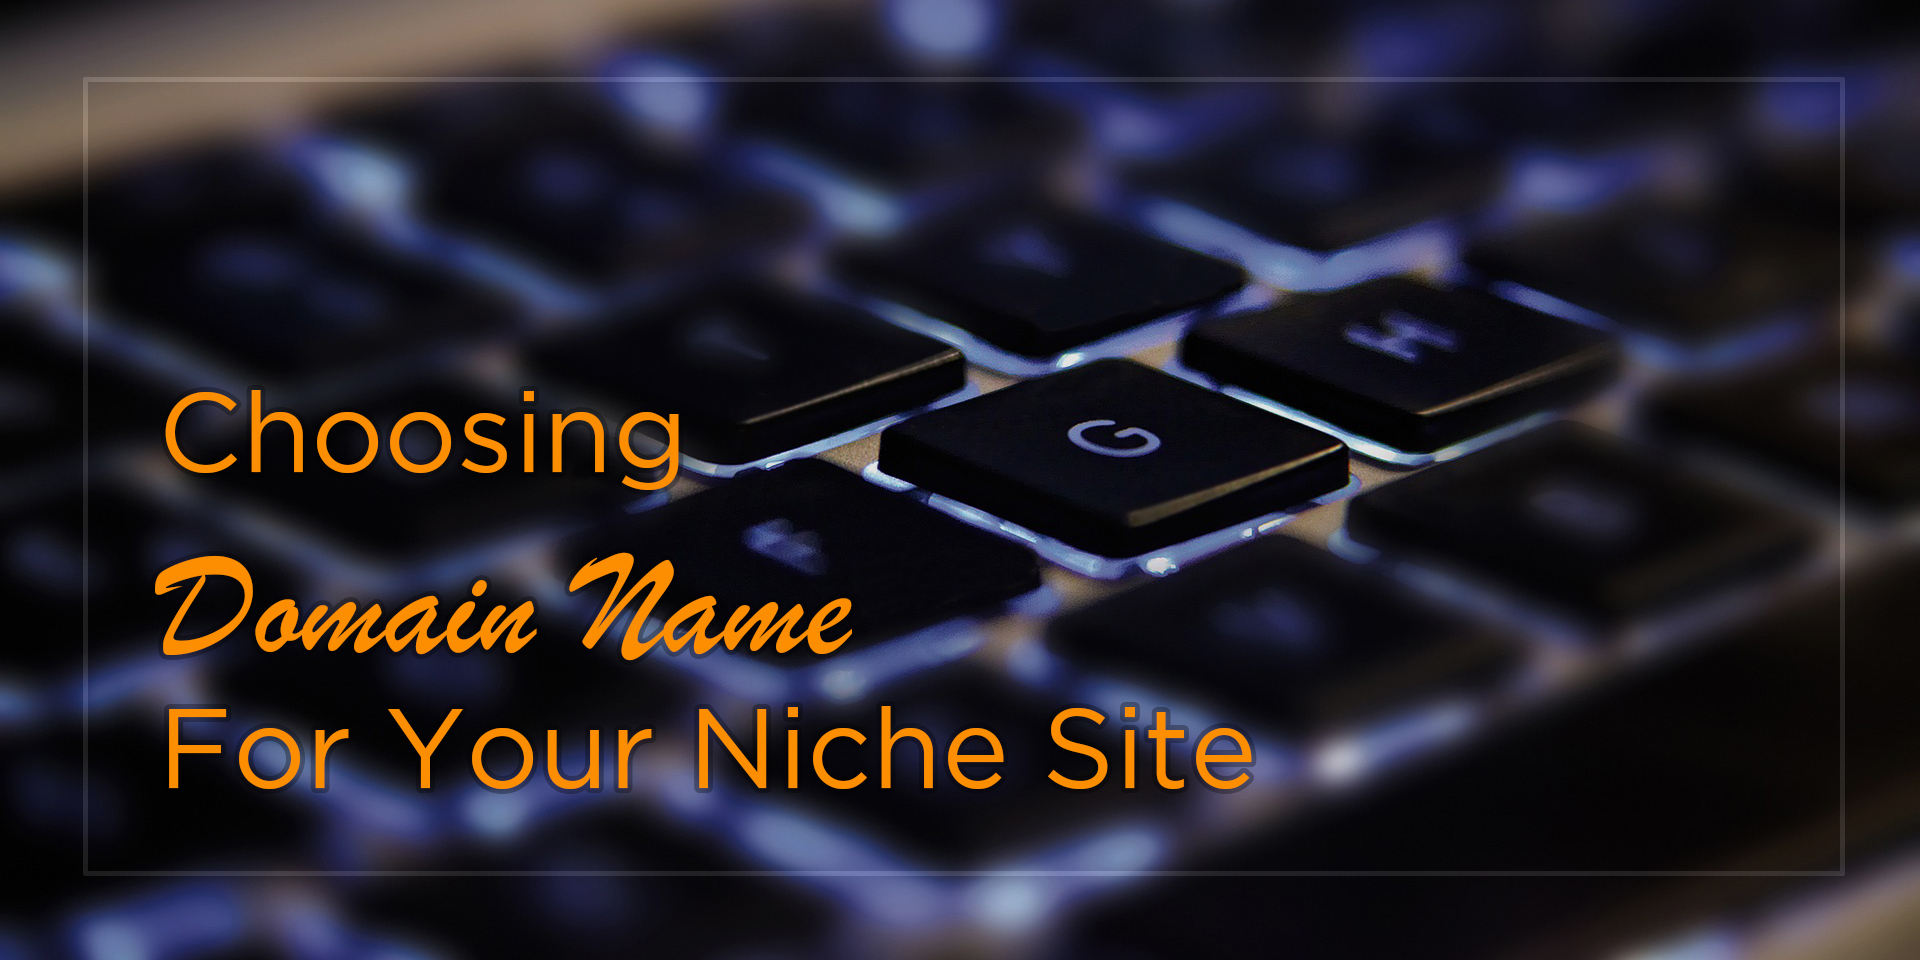 How To Choose Domain Name For Your Niche Site